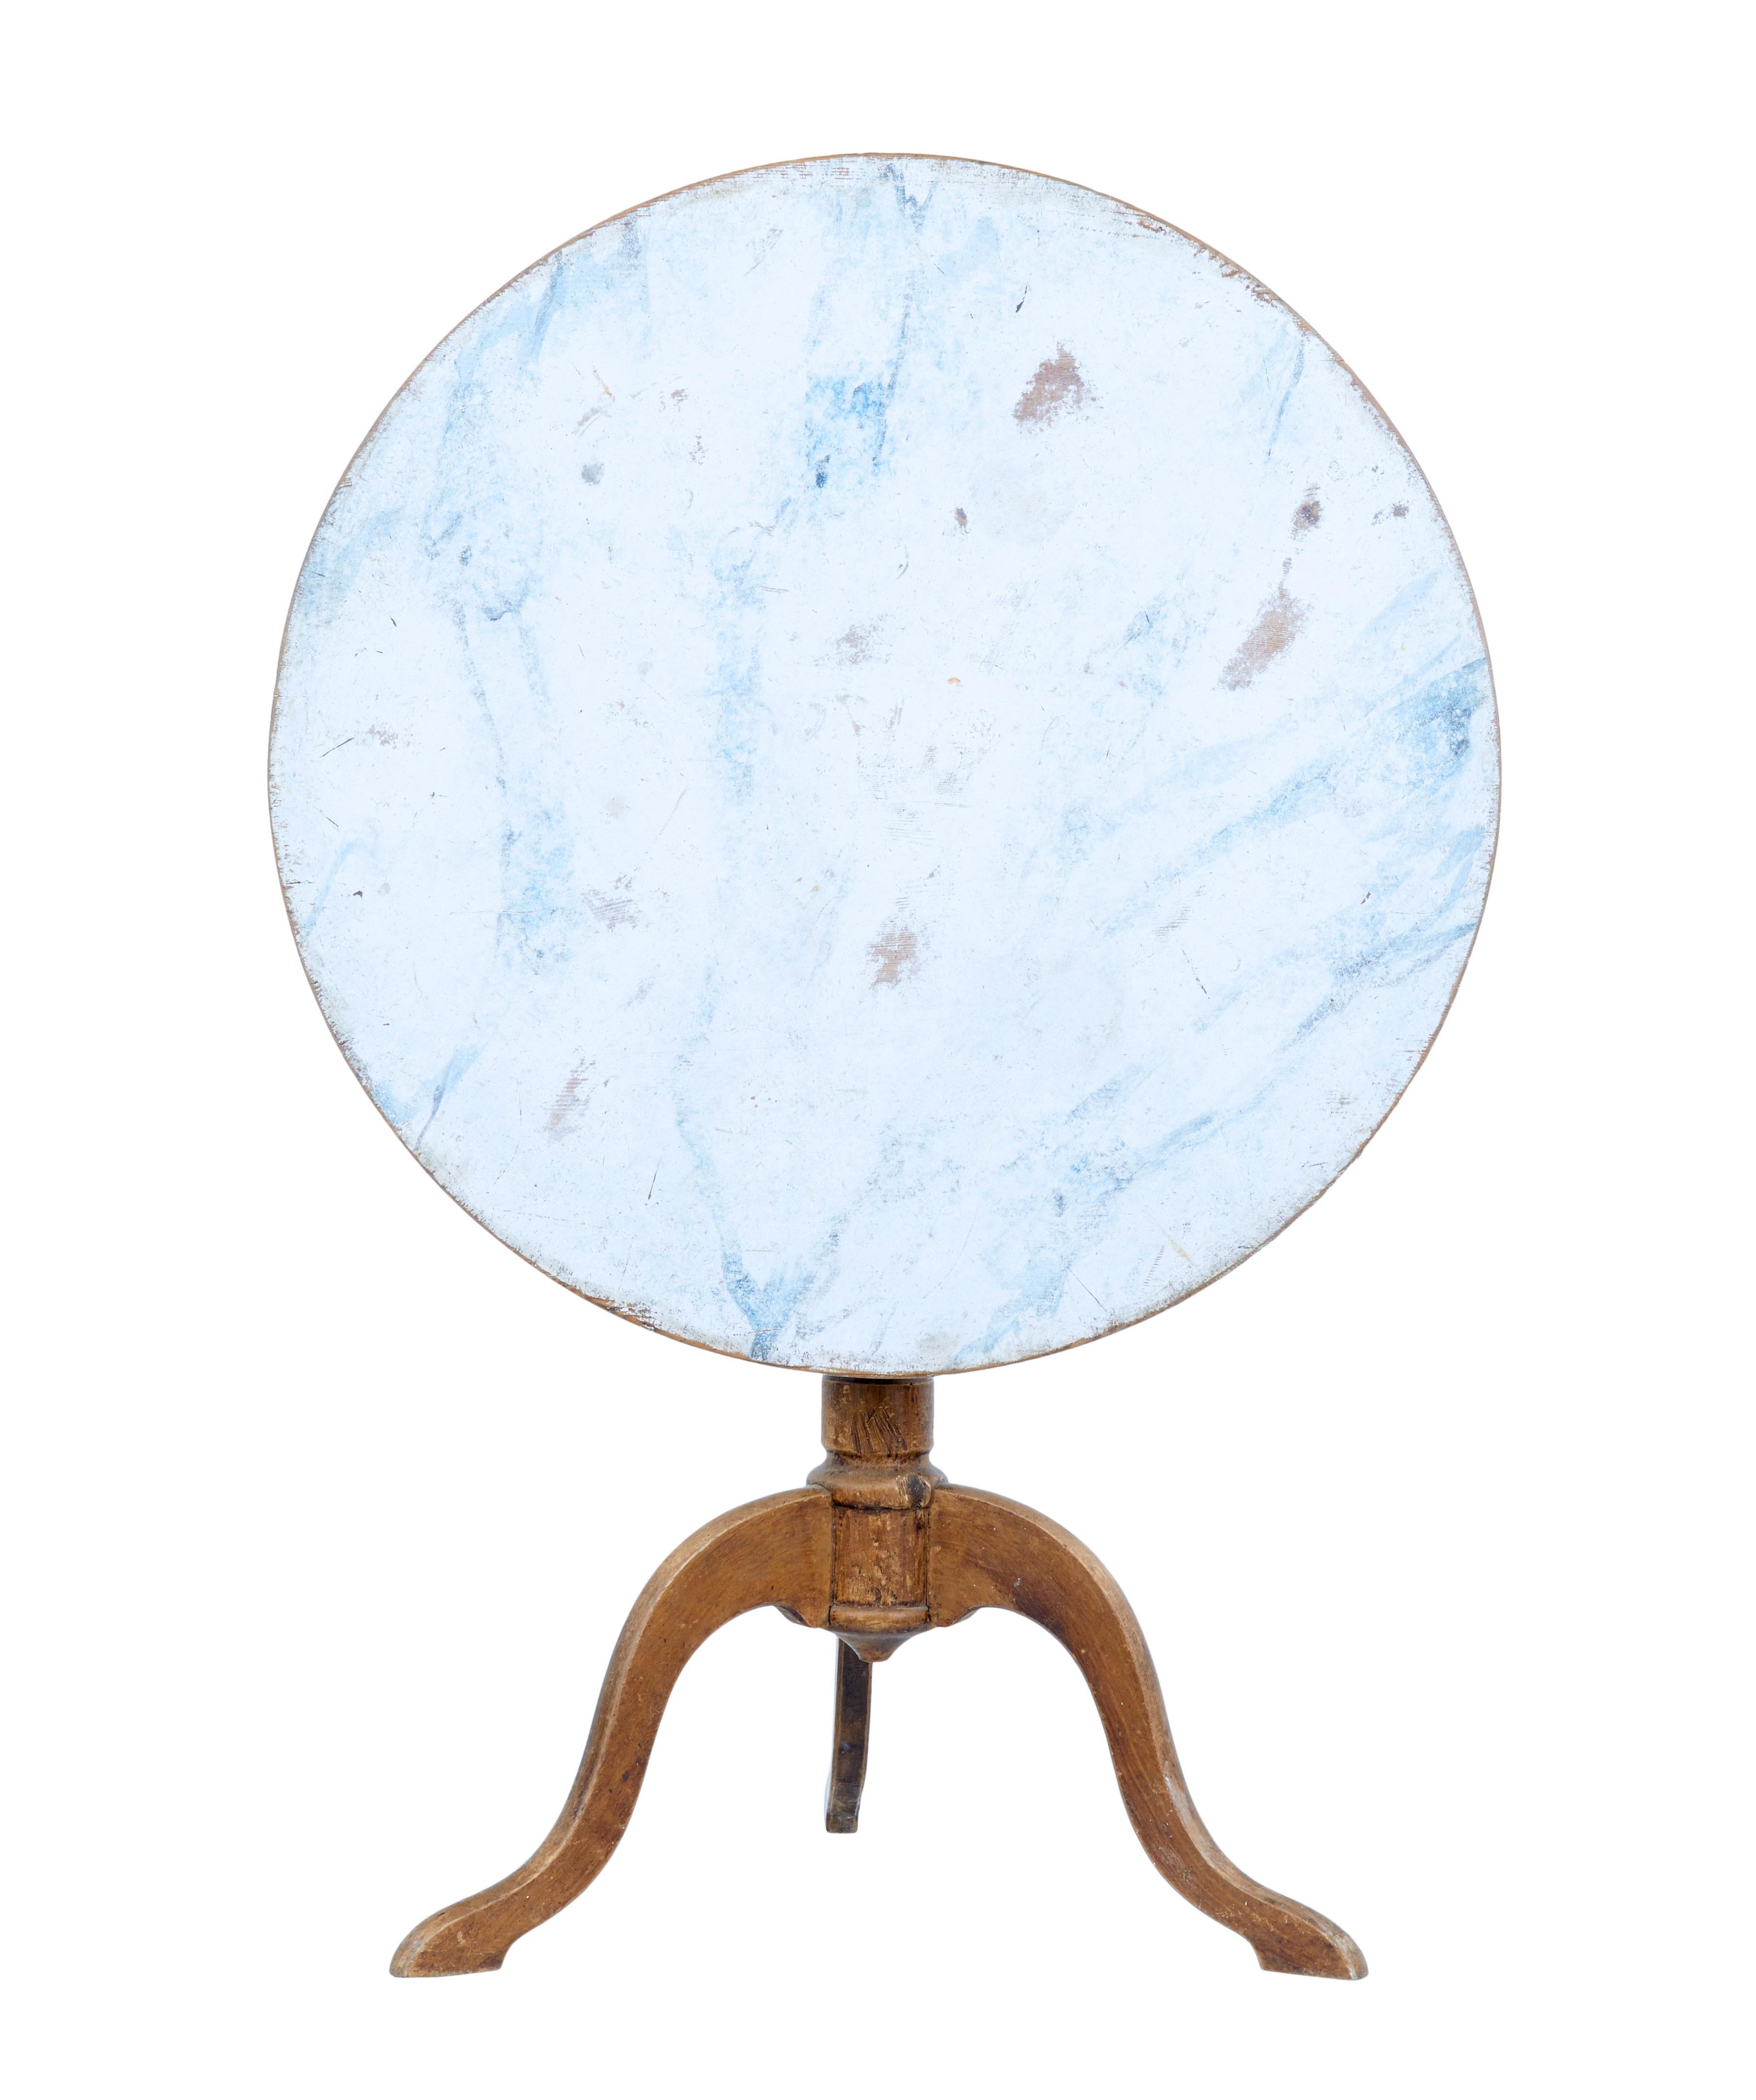 Fine rustic Swedish painted tripod table, circa 1860.

Circular top with faux hand painted marble effect, using whites and blues. Table fixes in place with peg. Standing on turned stem and 3 scrolled legs.

Base with traces of original